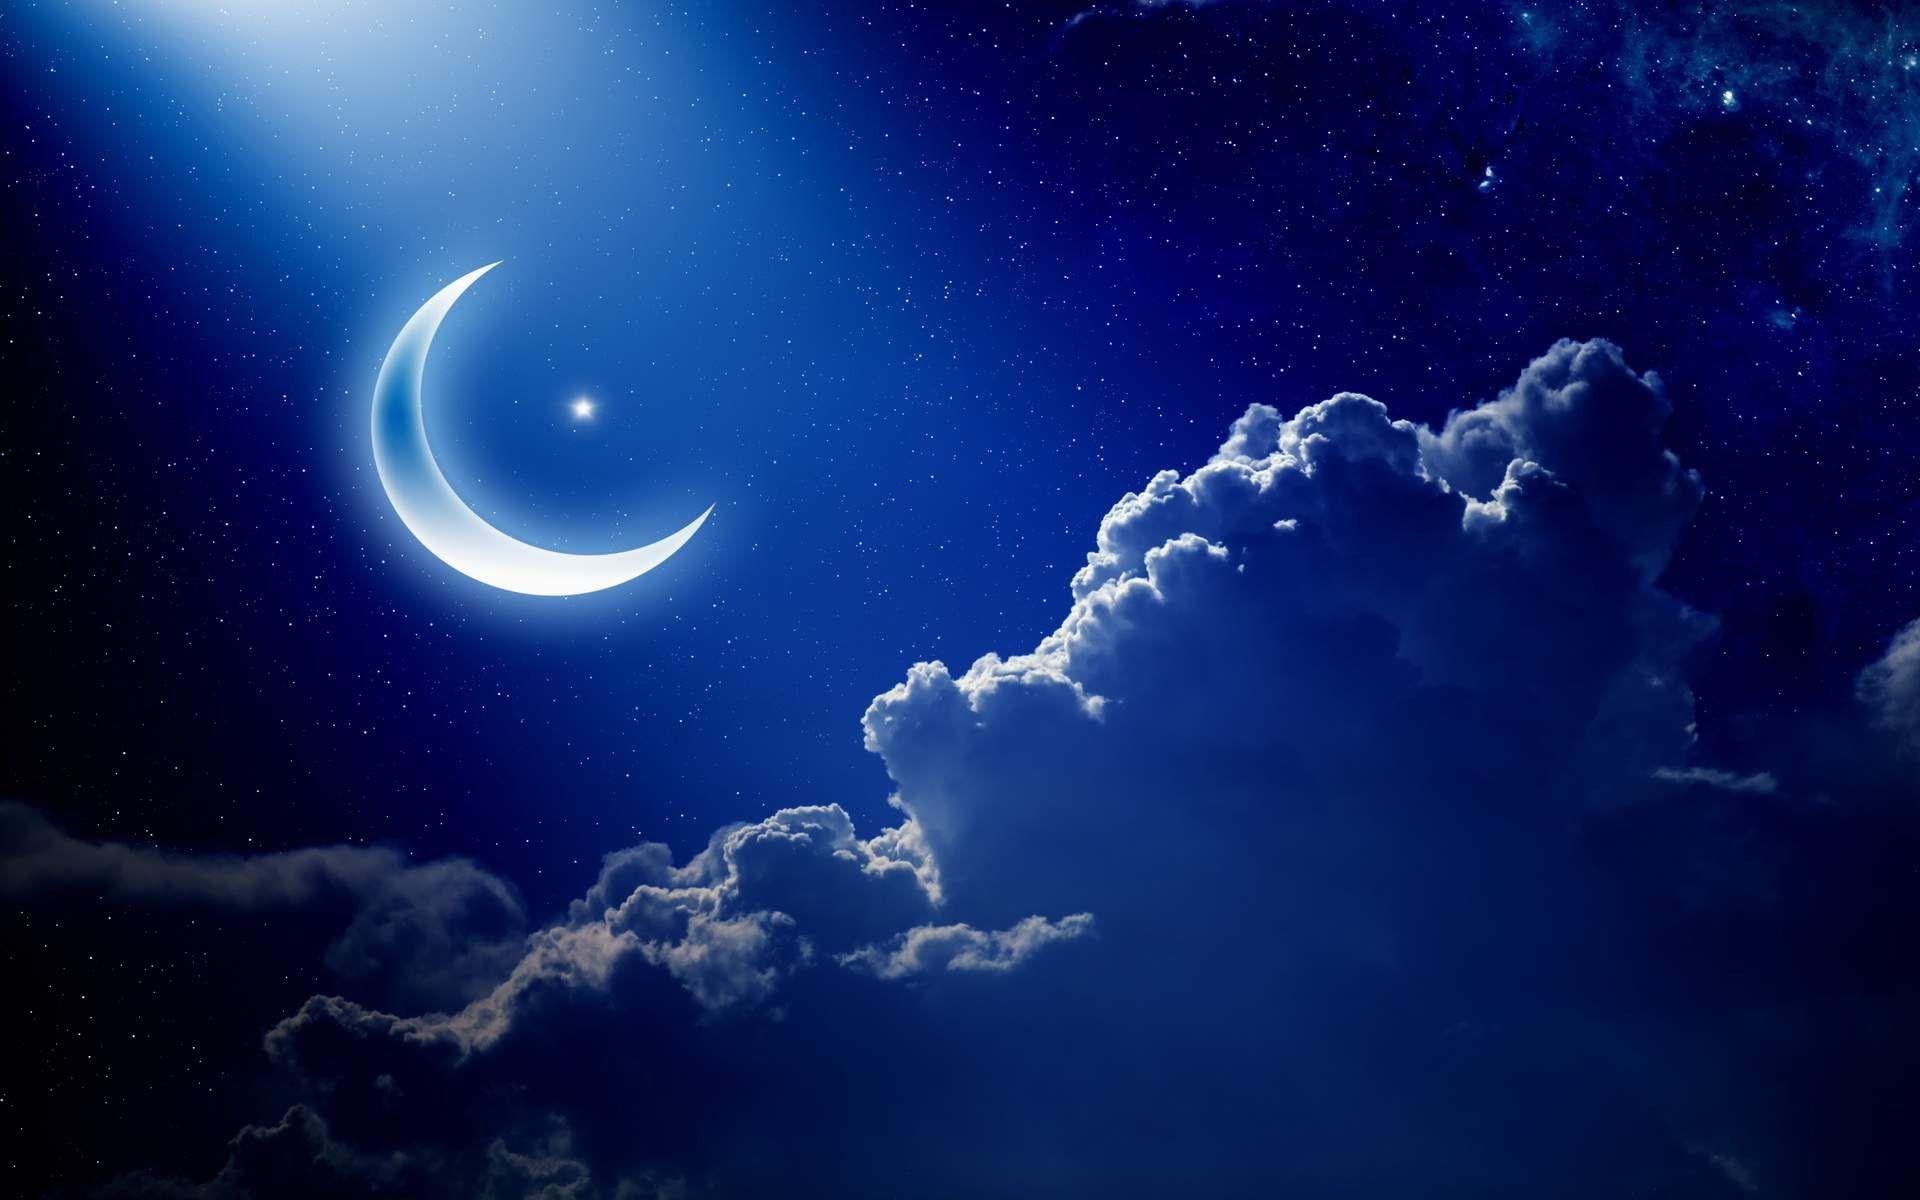 Crescent Moon Wallpapers for desk 4K in high resolution download We